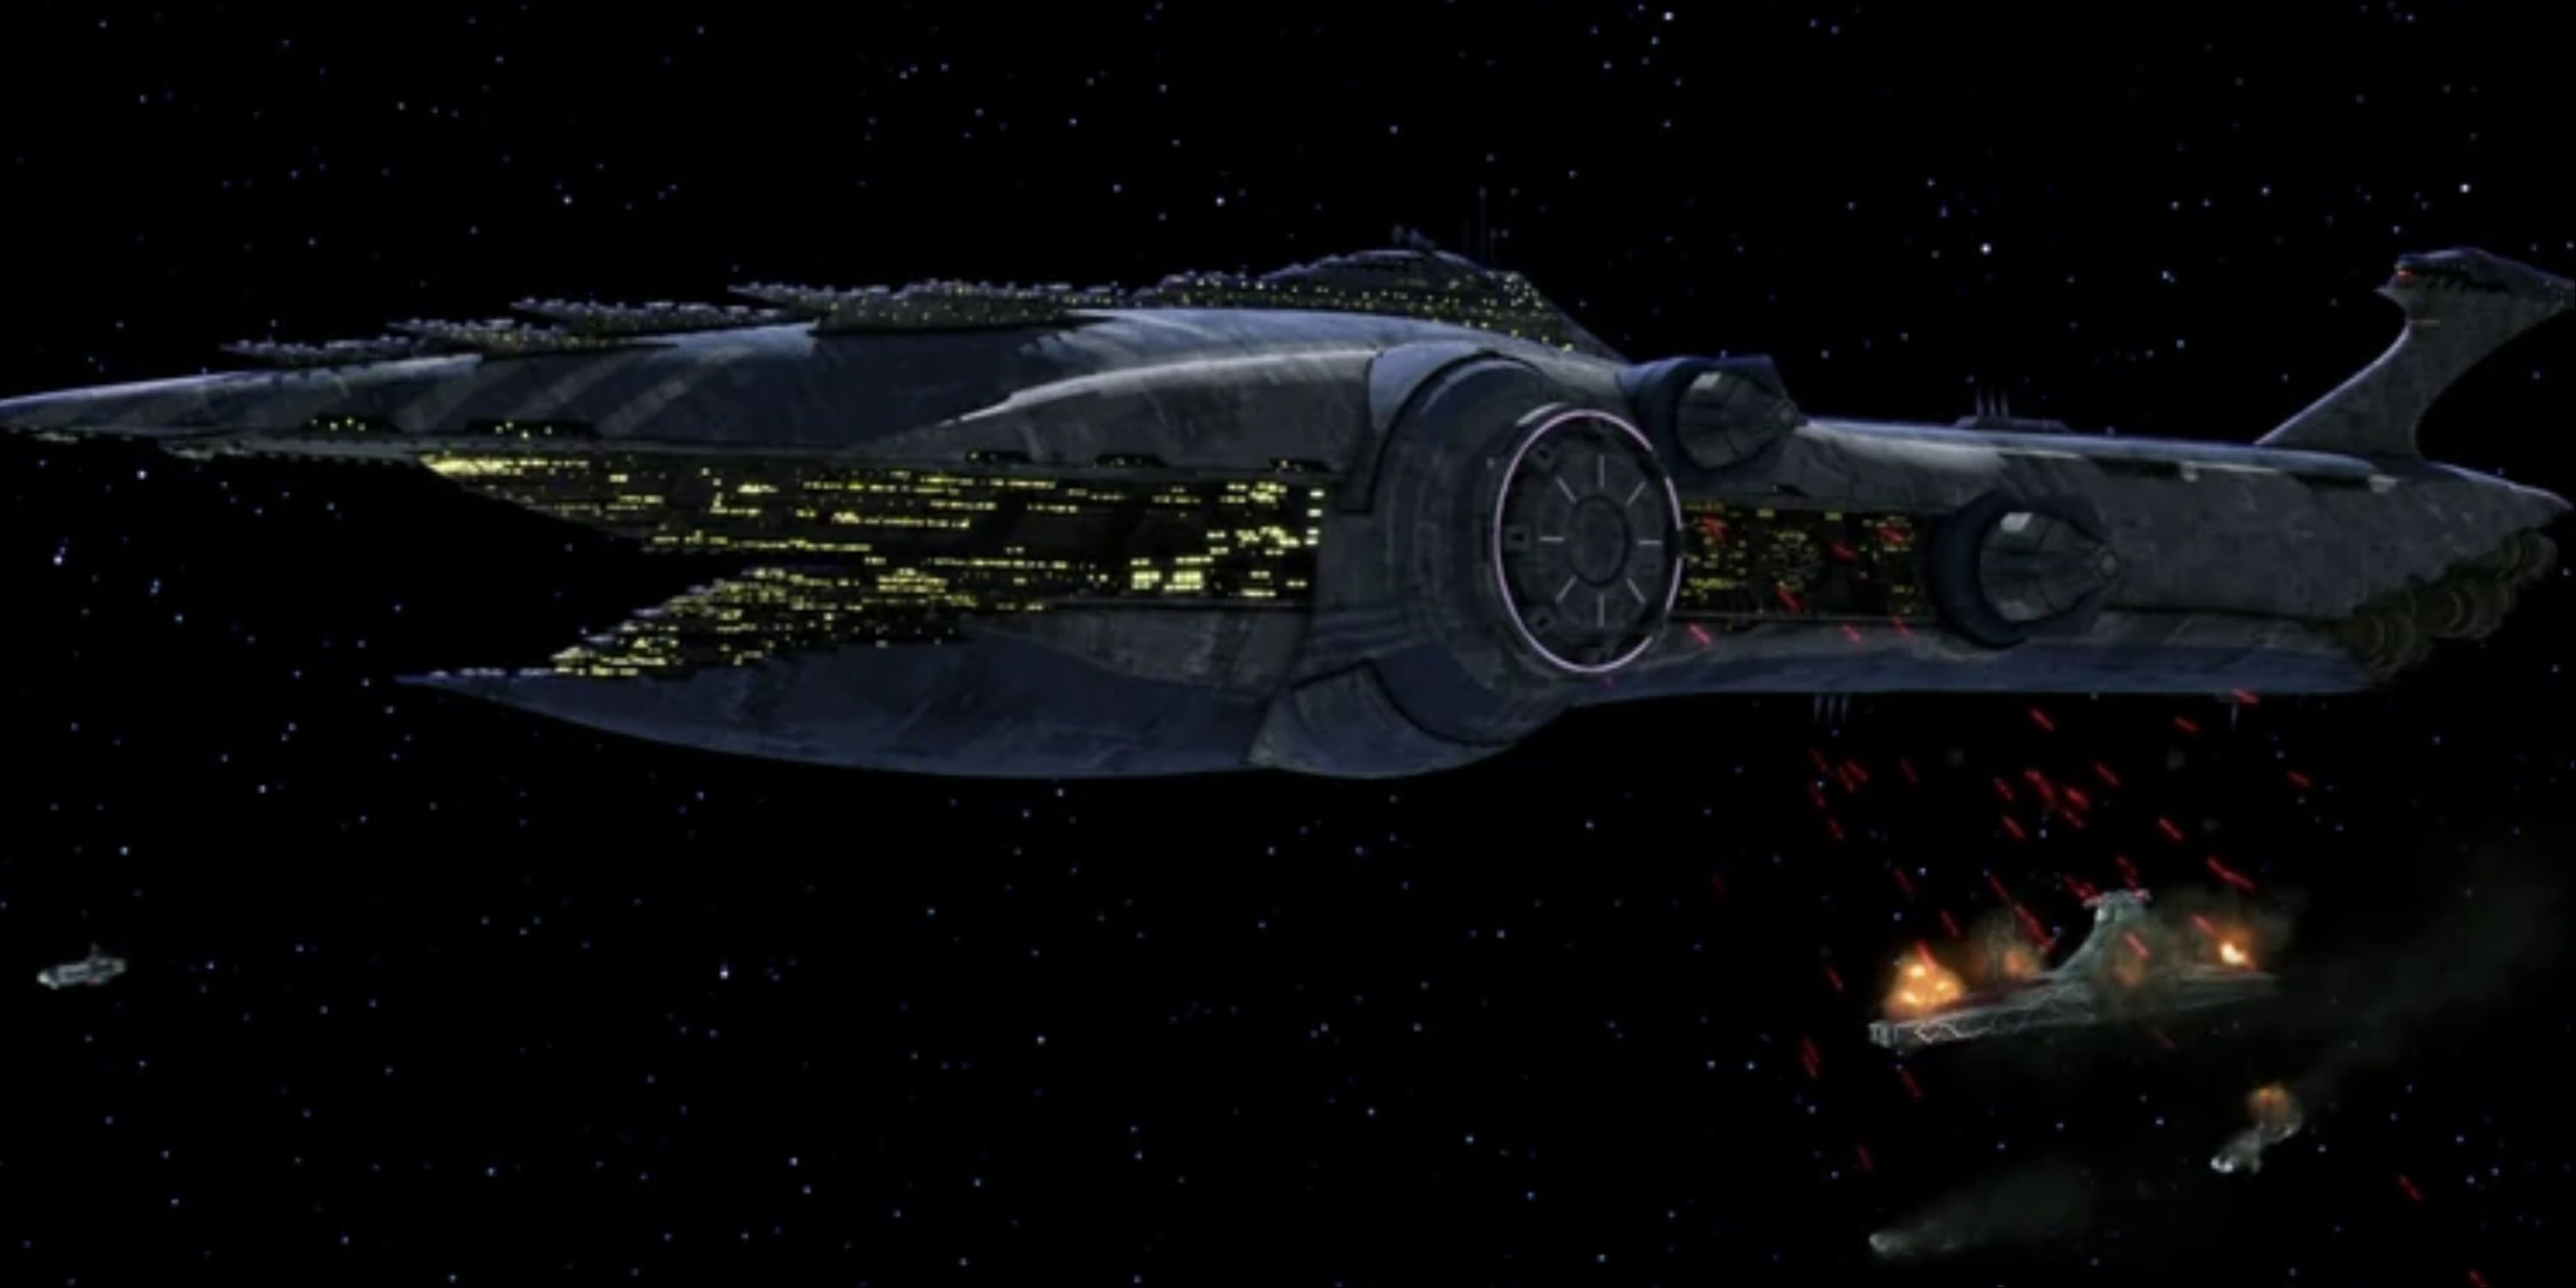 Battle_of_the_Ryndellia_System The Malevolence starwars screenshot from The Clone Wars